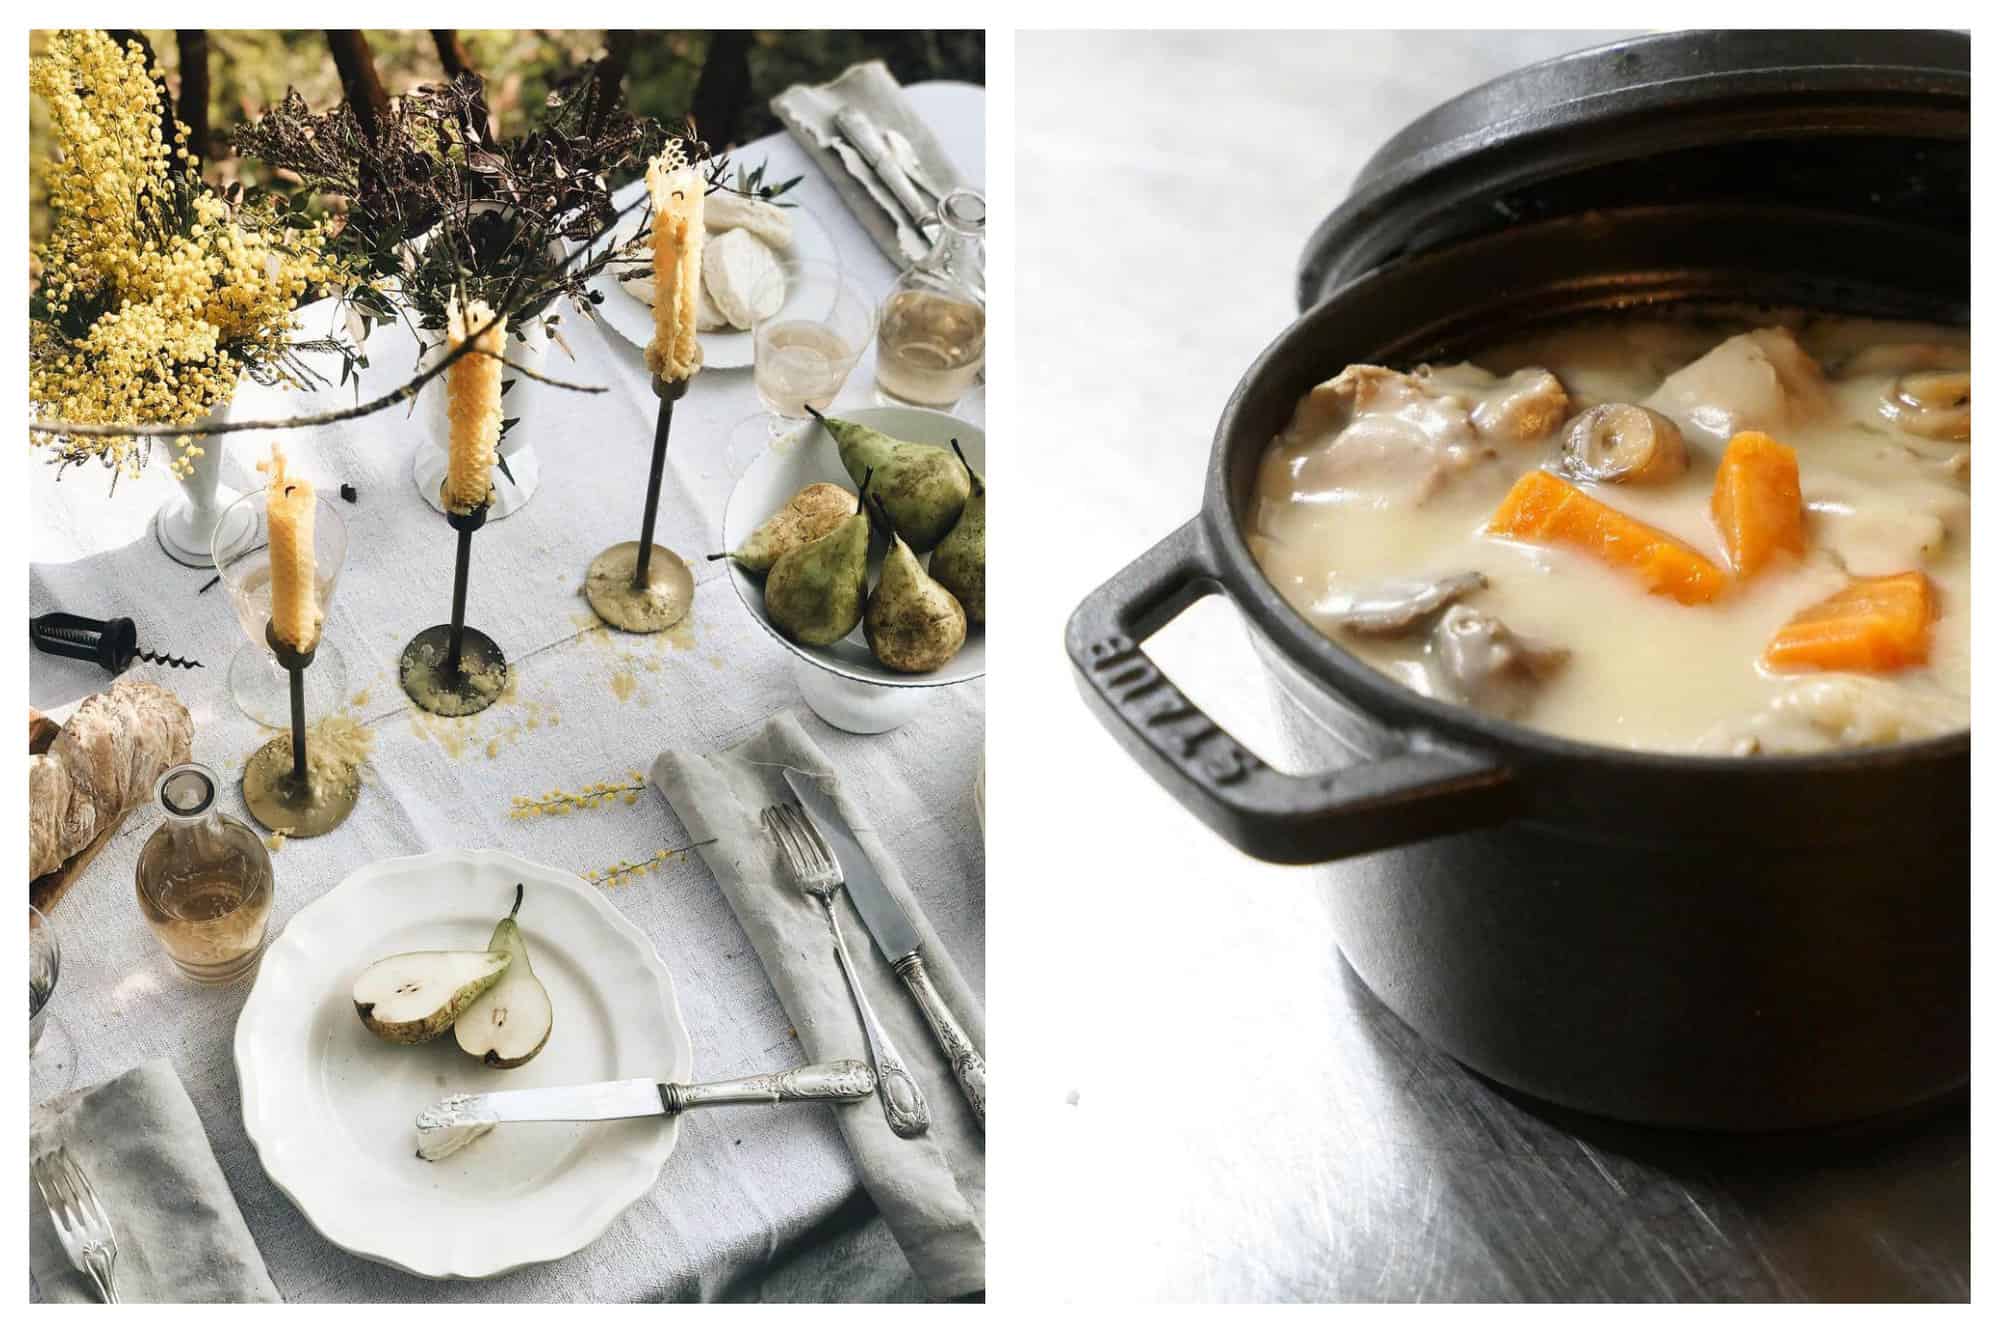 Left: A dining set up is pictured with yellow candles, yellow flowers, white plates, pints of rosé wine, fresh pears, gray tablecloth and napkins, and vintage silverware. Right: A famous French dish called Blanquette de Veau is pictured in a black Staub cookware. It is composed of veal, carrots and beige-coloured creamy sauce.